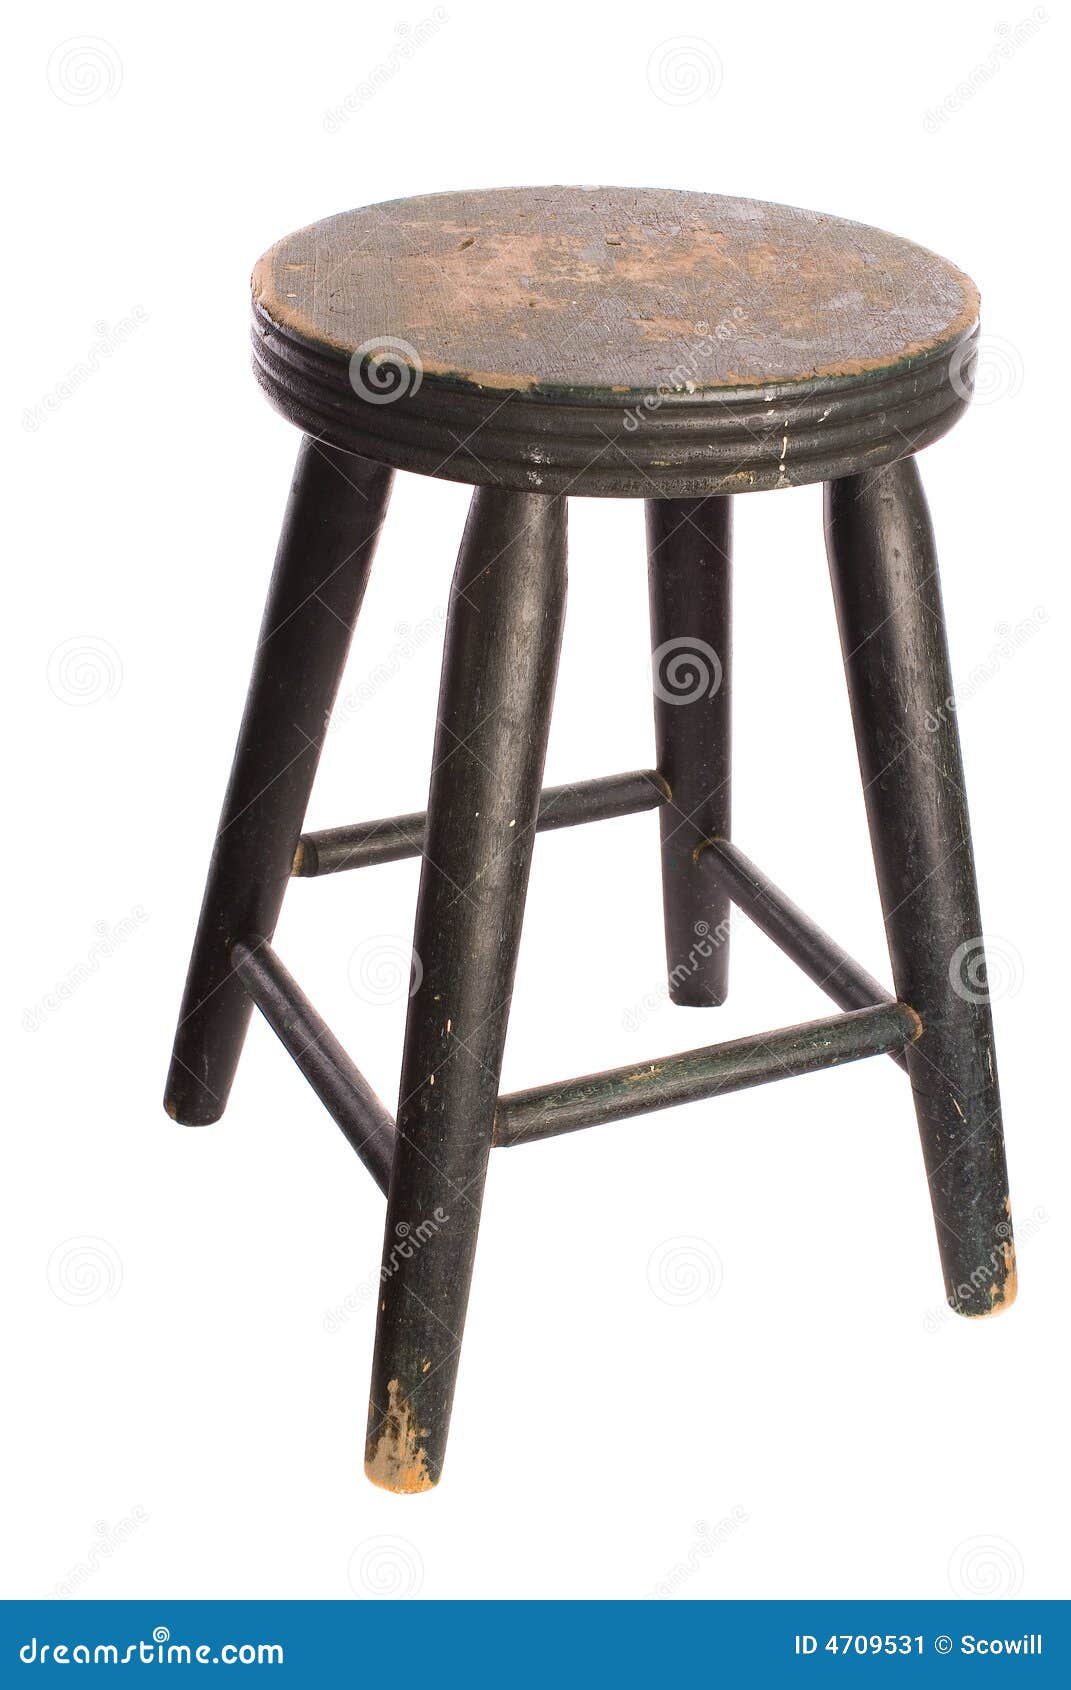 More similar stock images of ` Antique Wooden Stool `